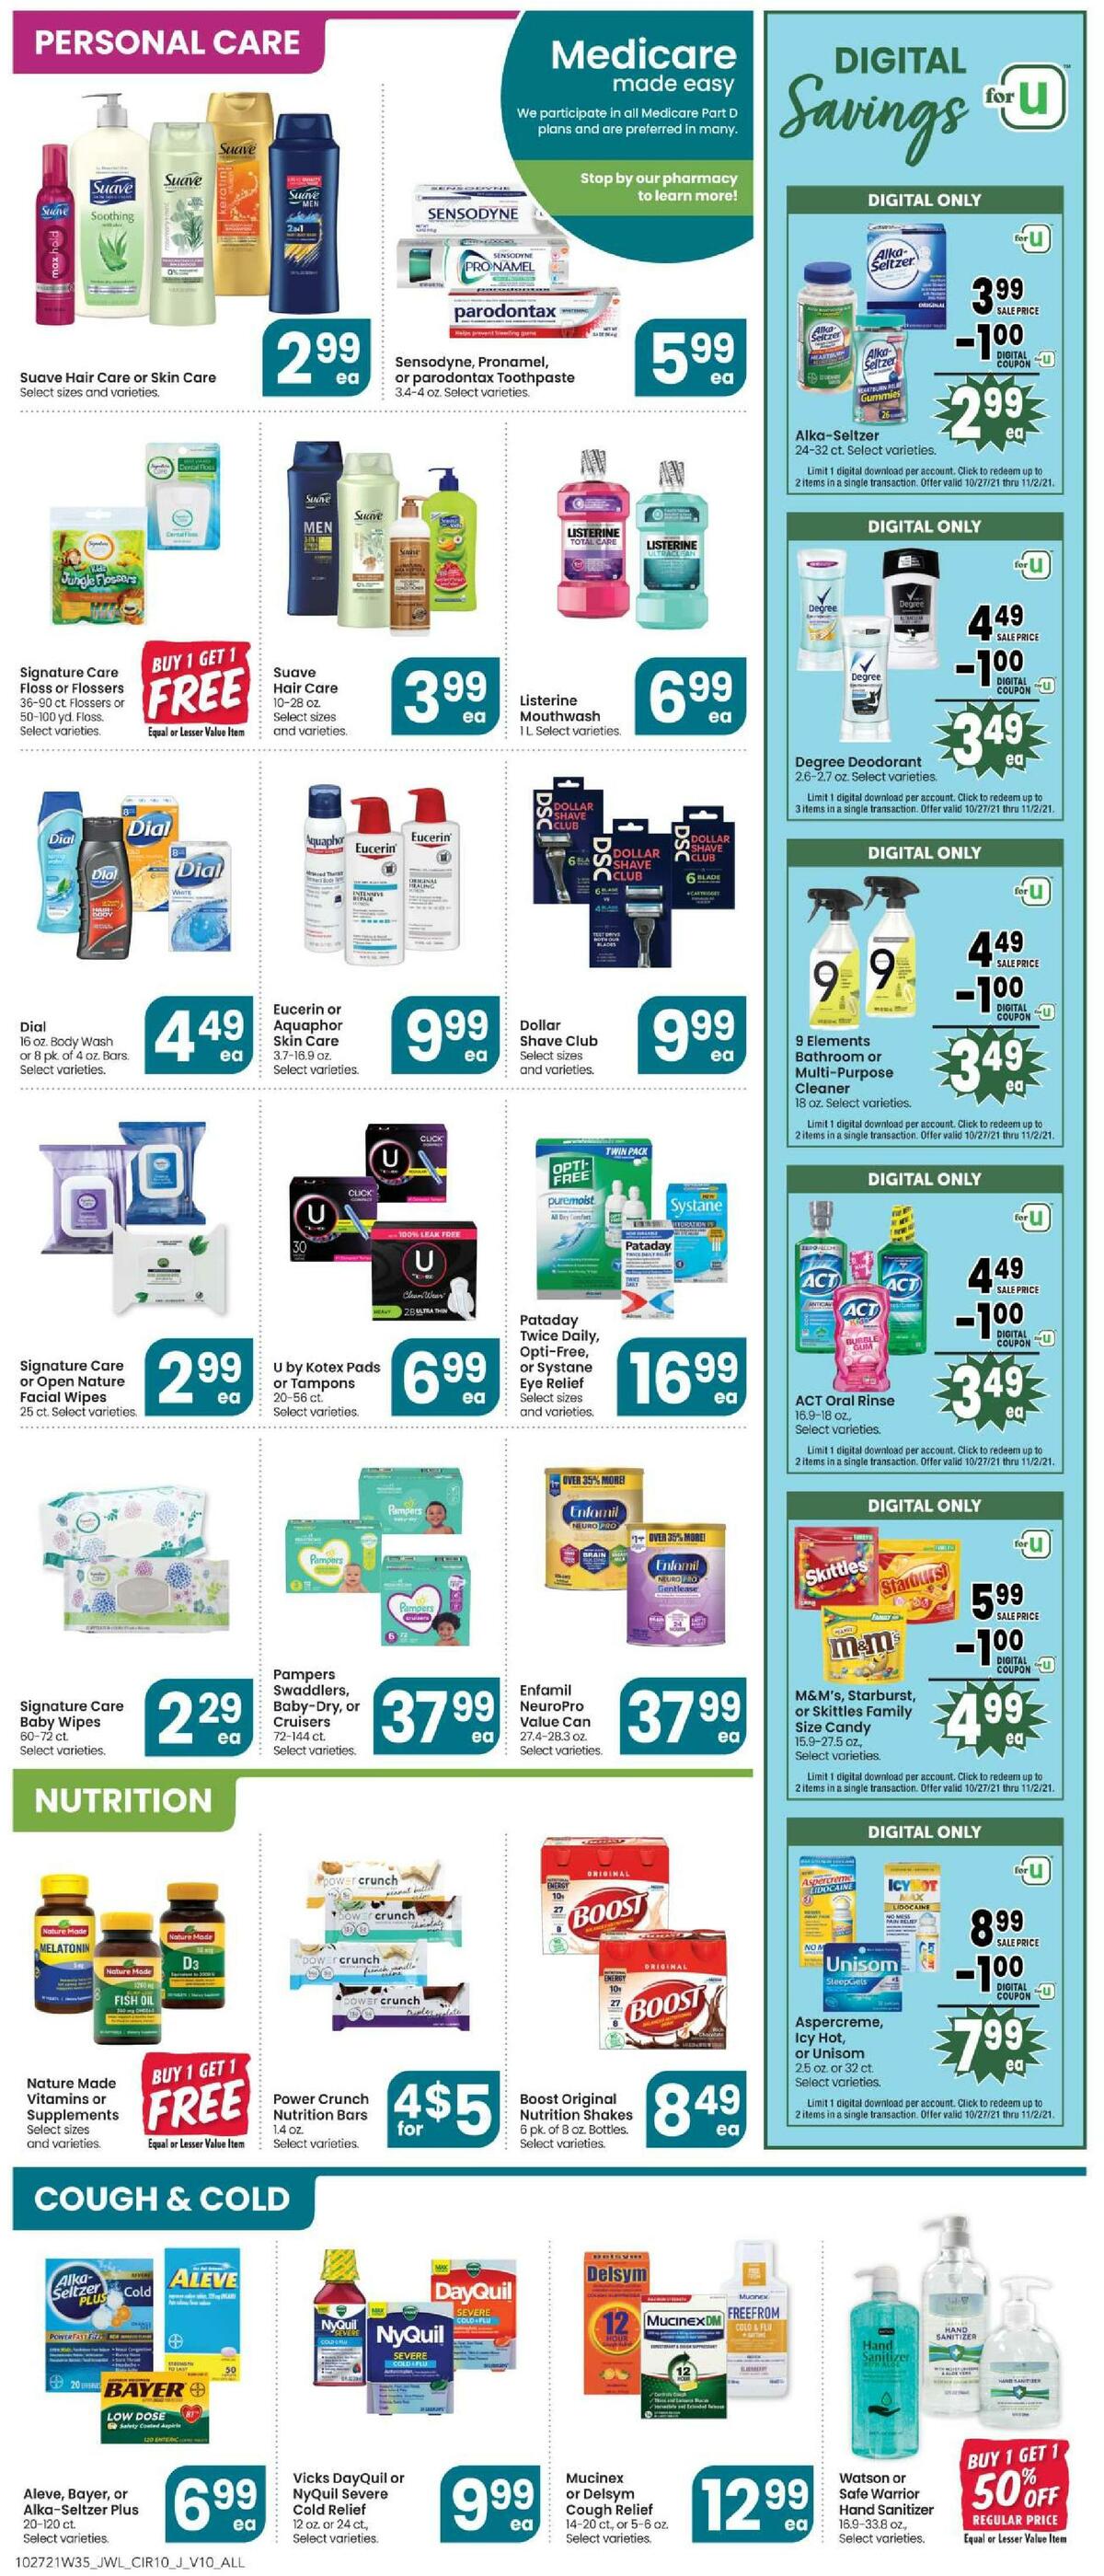 Jewel Osco Weekly Ad from October 27